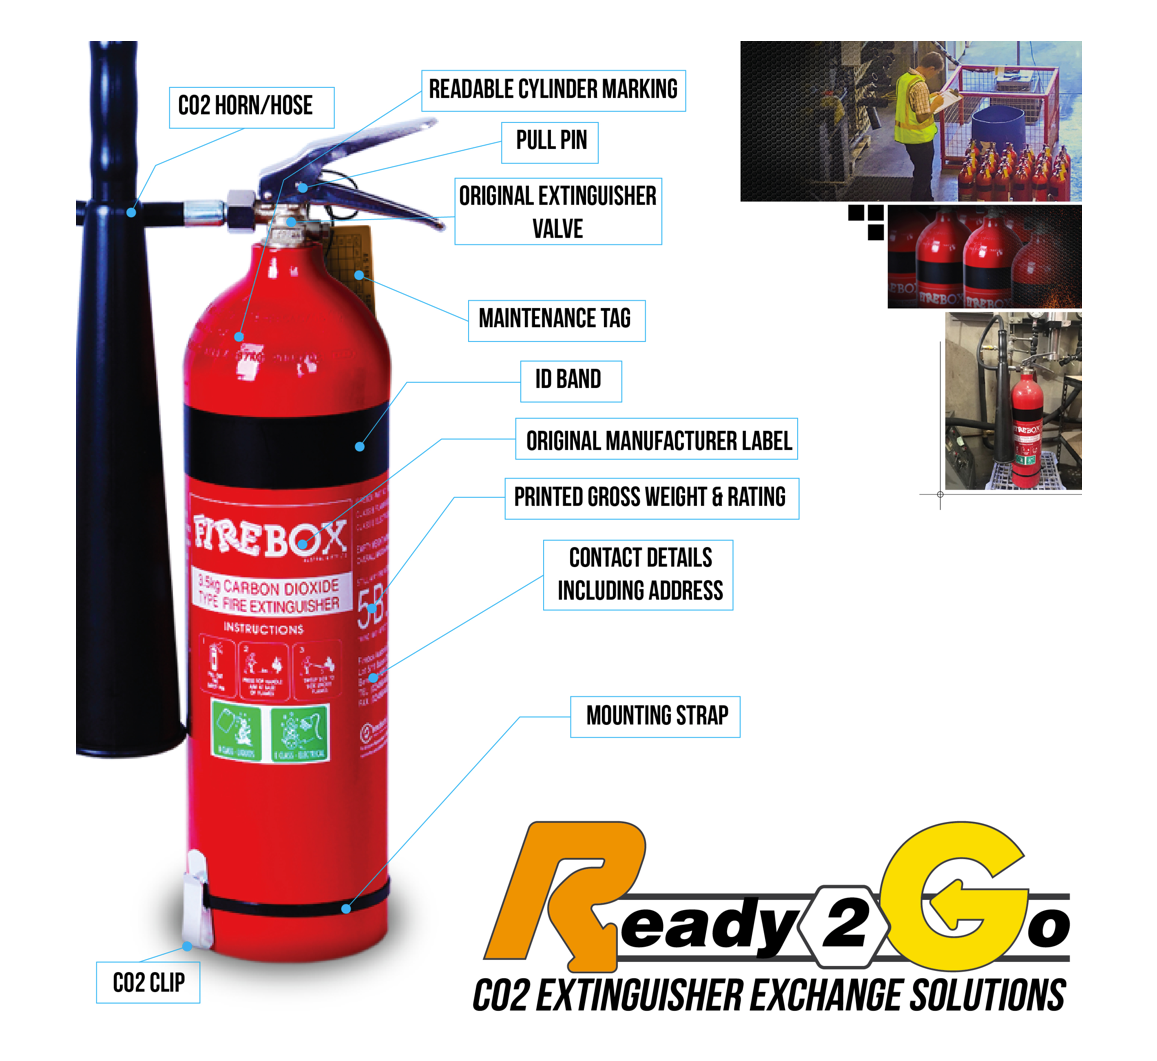 5kg CO2 Pressure Tested Exchange Extinguisher - Premium Ready2go CO2 Exchange Extinguishers from Varies - Shop now at Firebox Australia